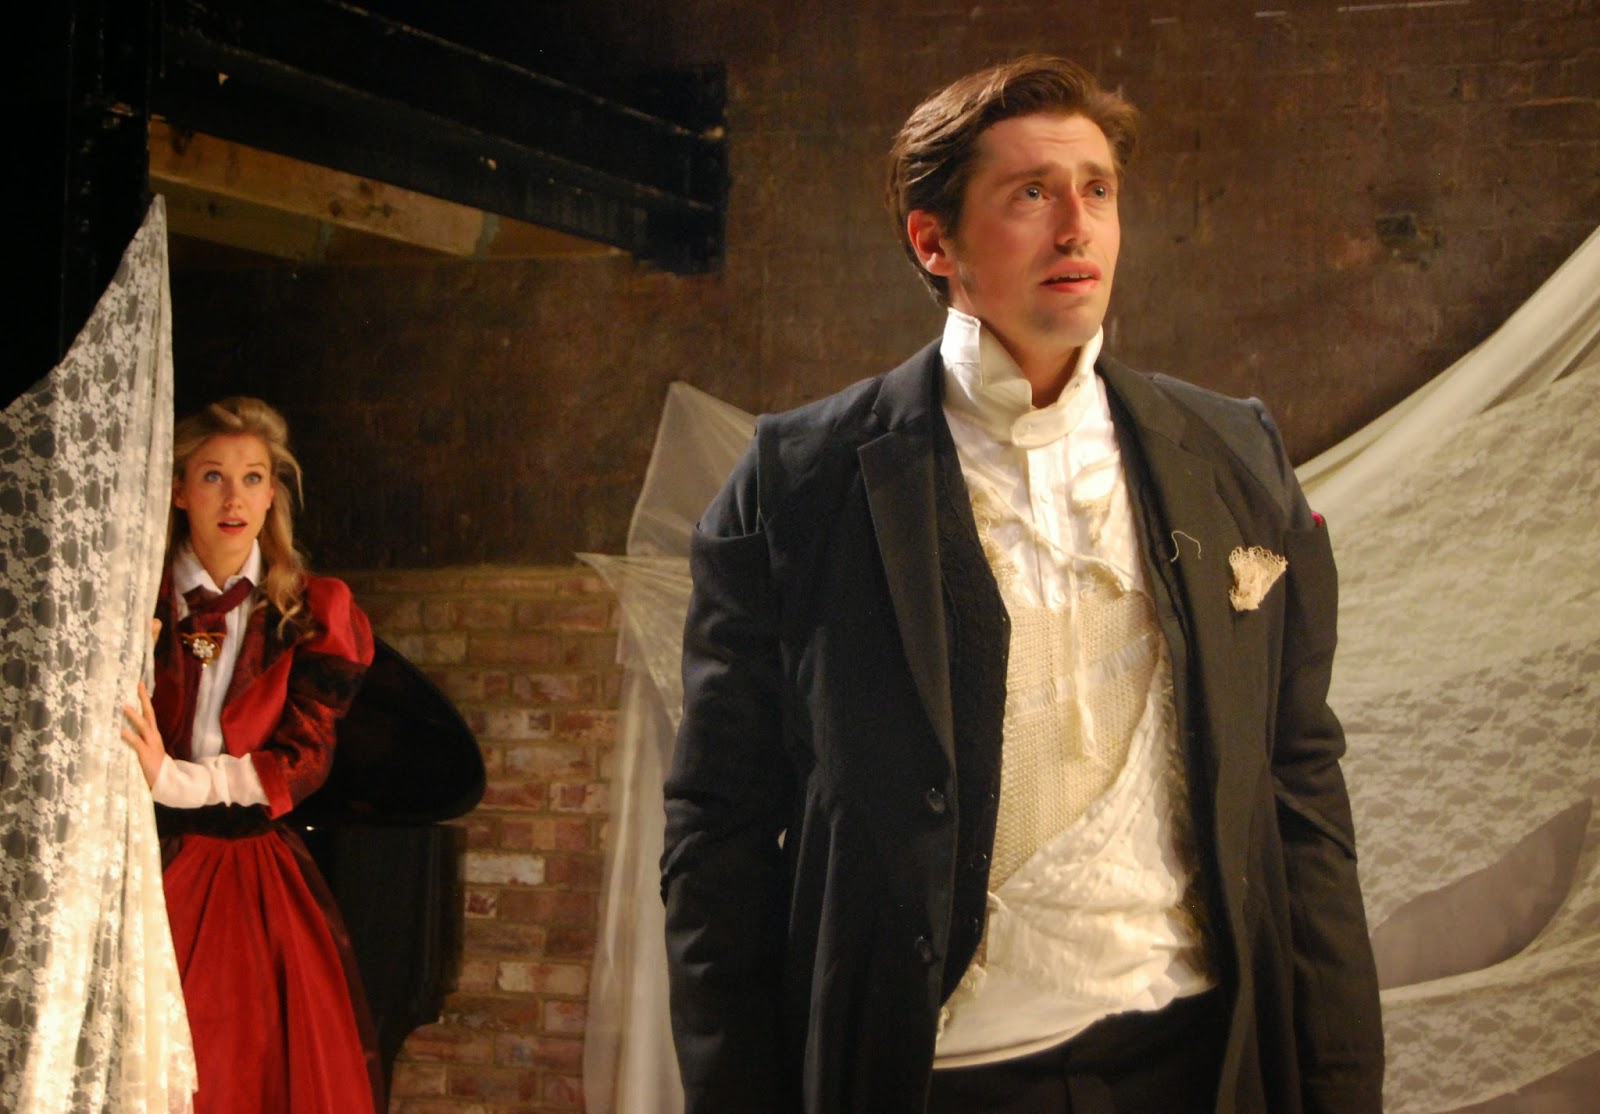 Lucy Knight as Sophie and Adam Tunnicliffe as Werther in Massenet's Werther at the Grimeborn Festival at Arcola Theatre